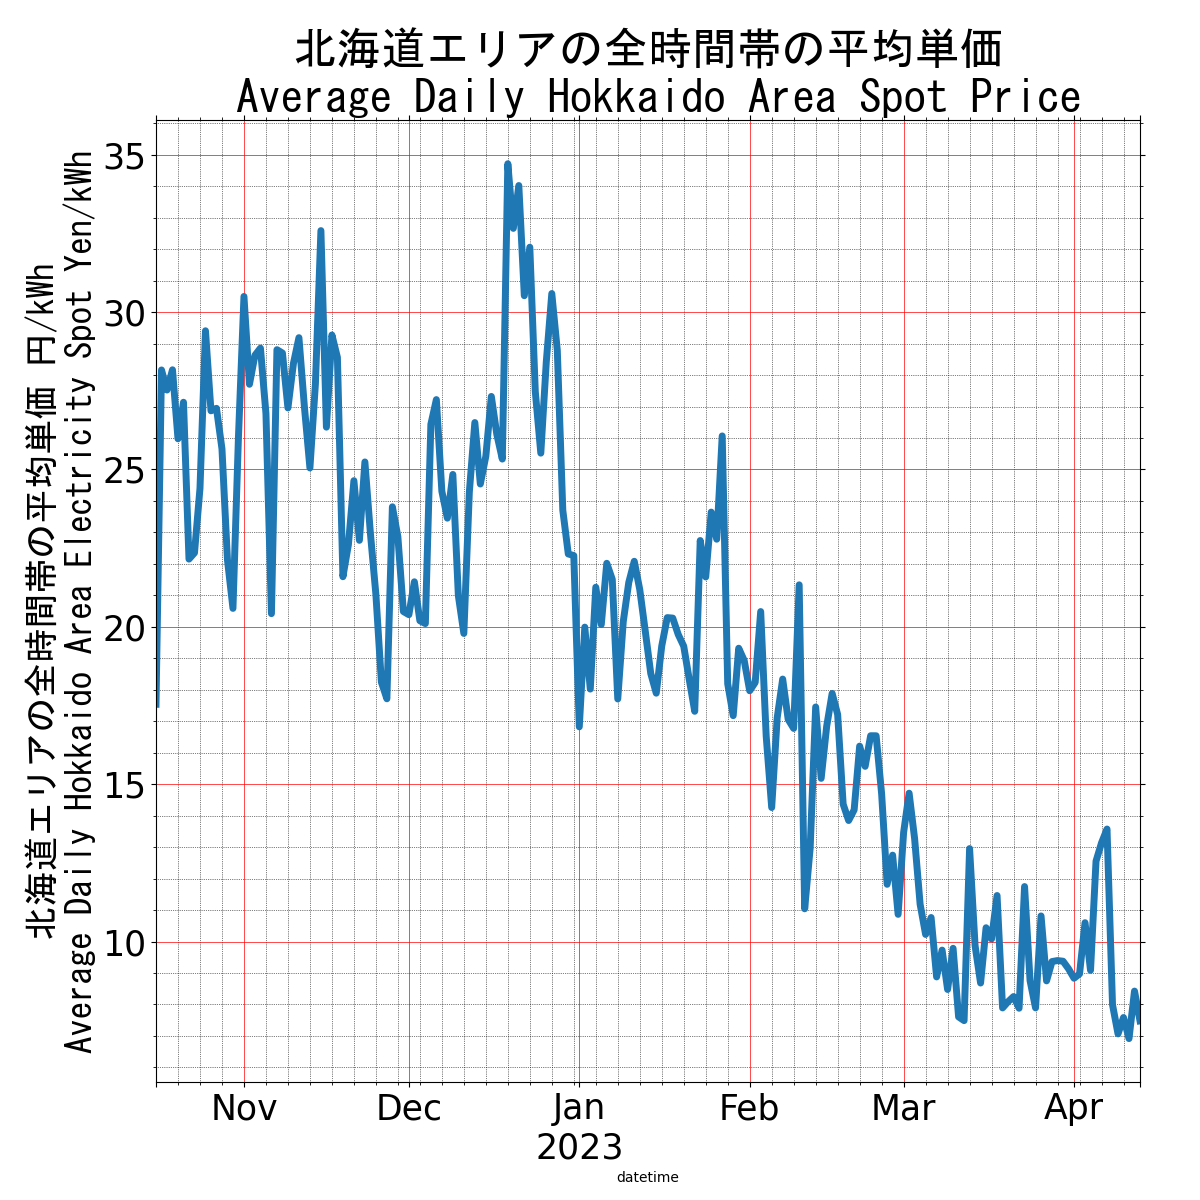 Japanese Electricity JEPX Hokkaido Area Price plotted over time for the last 90 days